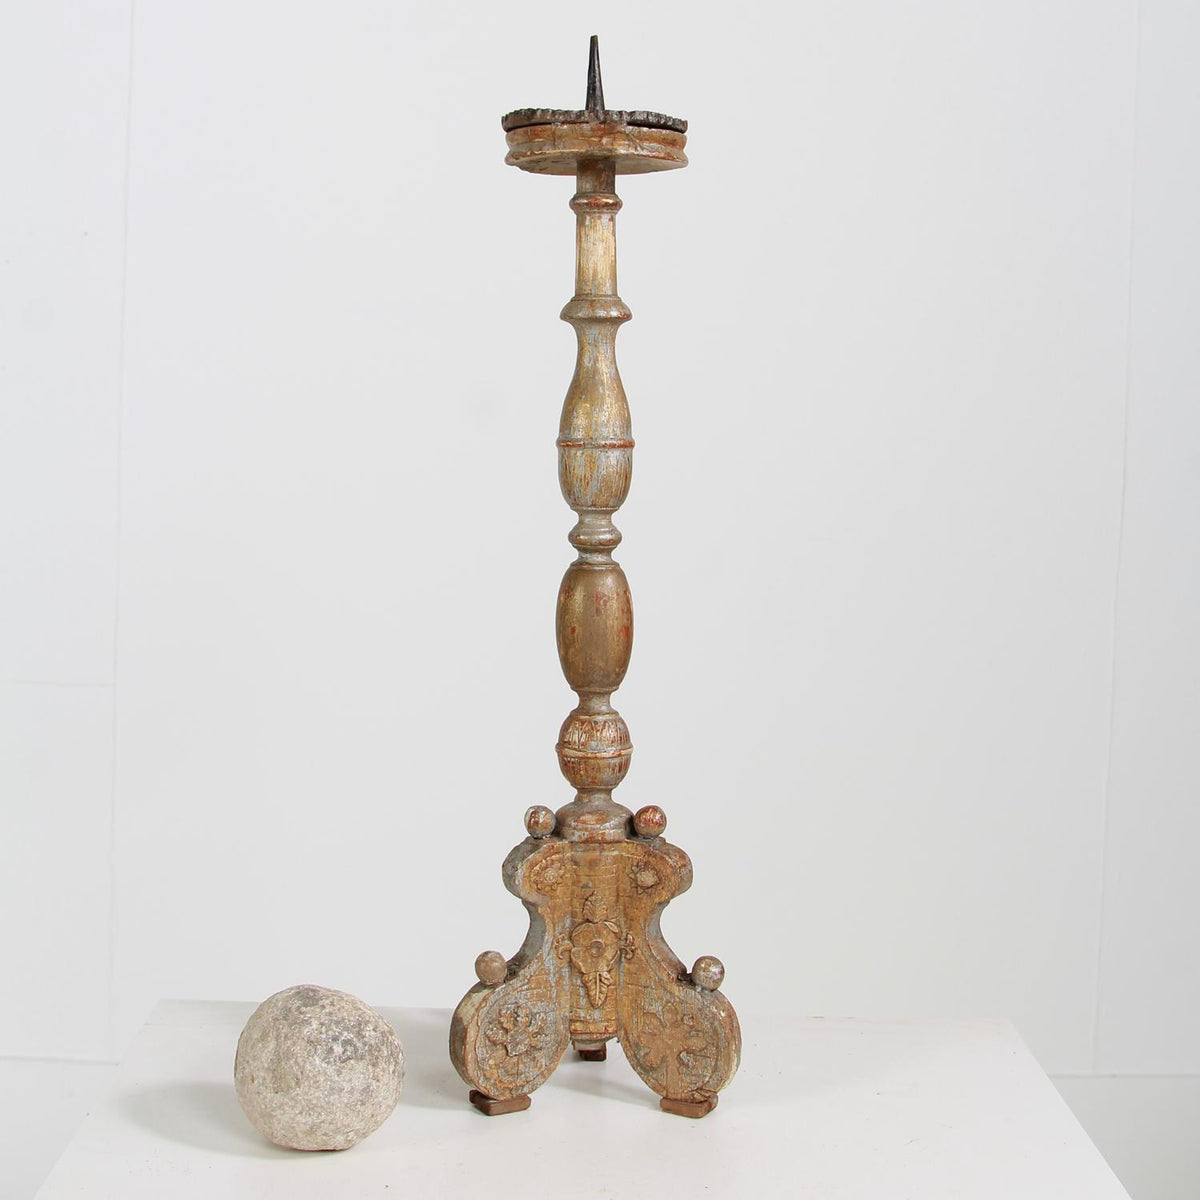 Beautiful Continental Pricket Candlestick with its Original Worn Gilded Patina